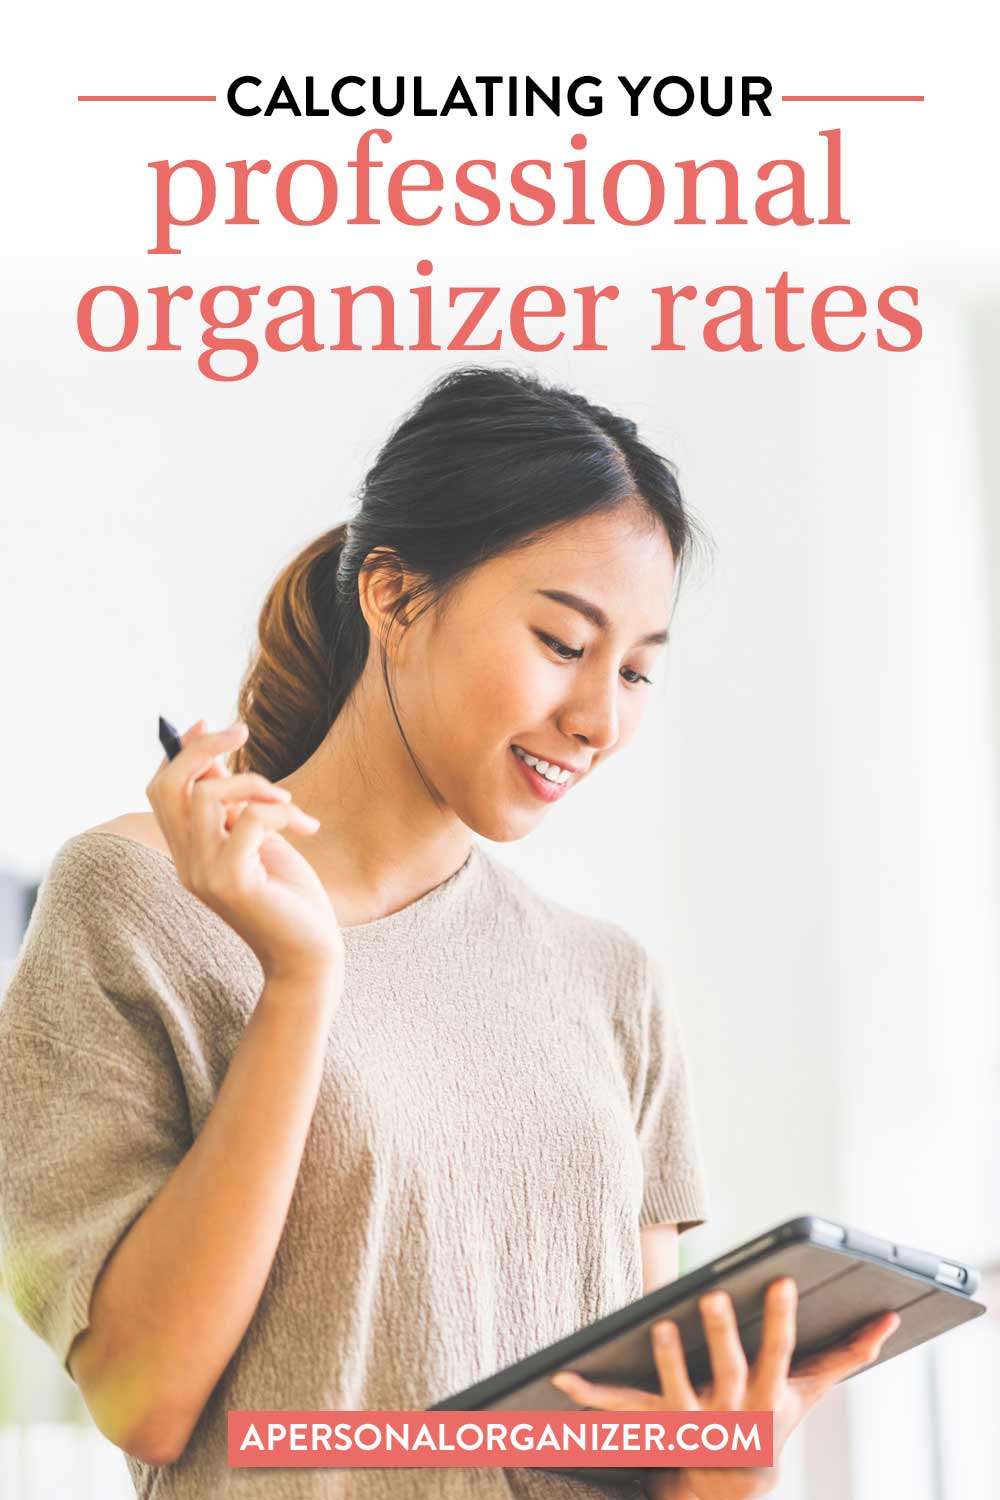 Calculating Your Professional Organizer Rates With Confidence